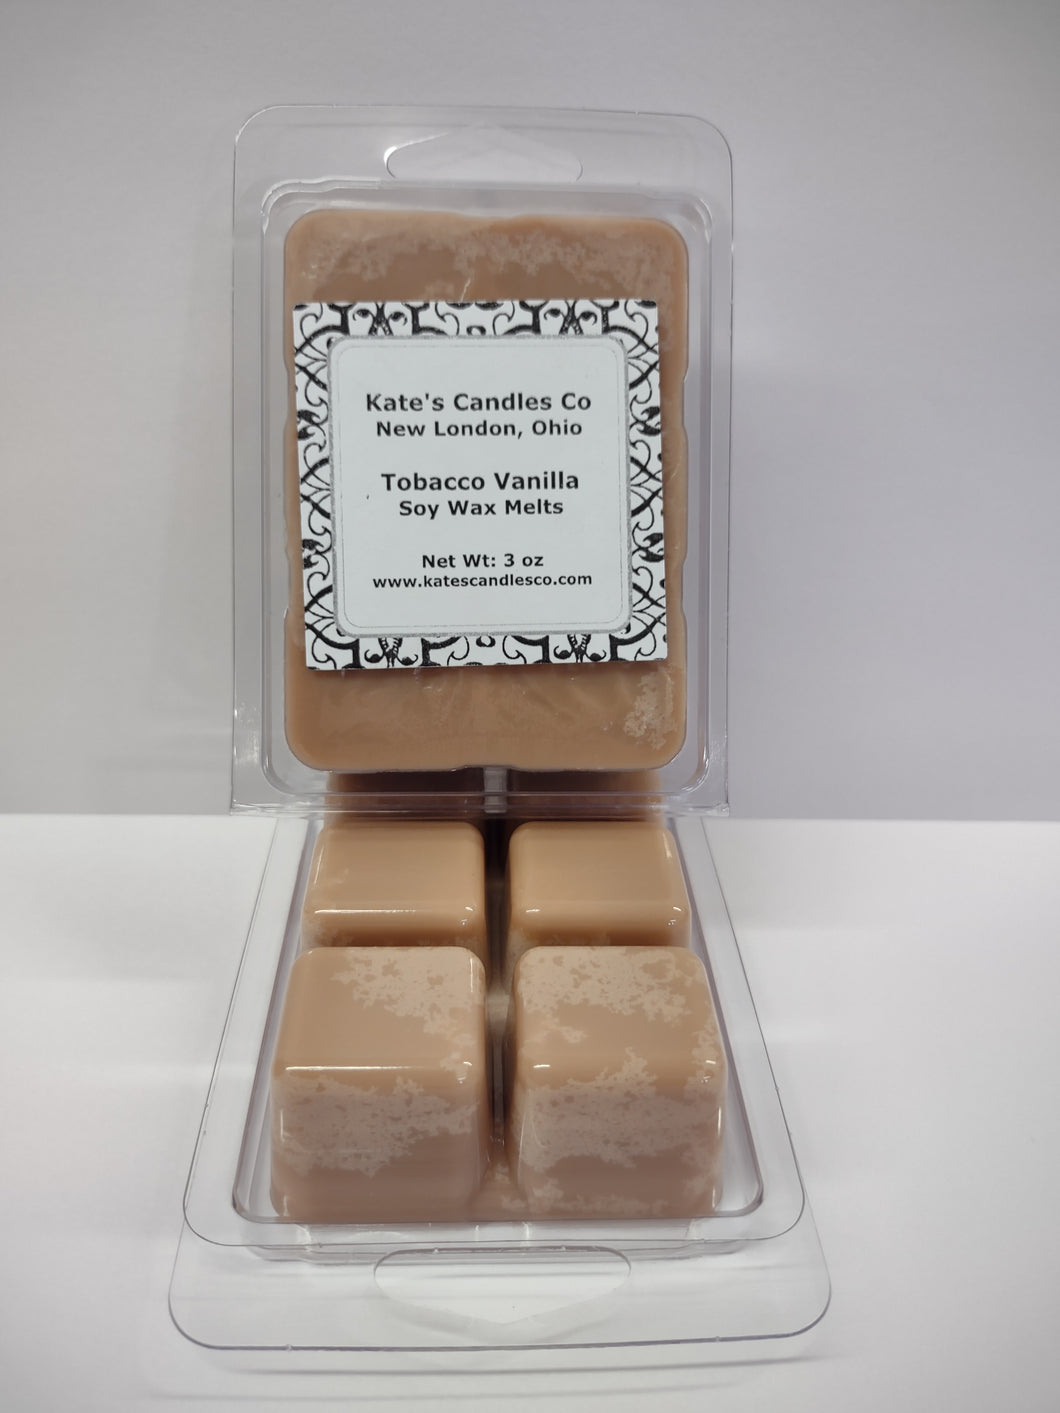 Tobacco Vanilla Wax Melts  Kate's Candles Co. Soy Candles